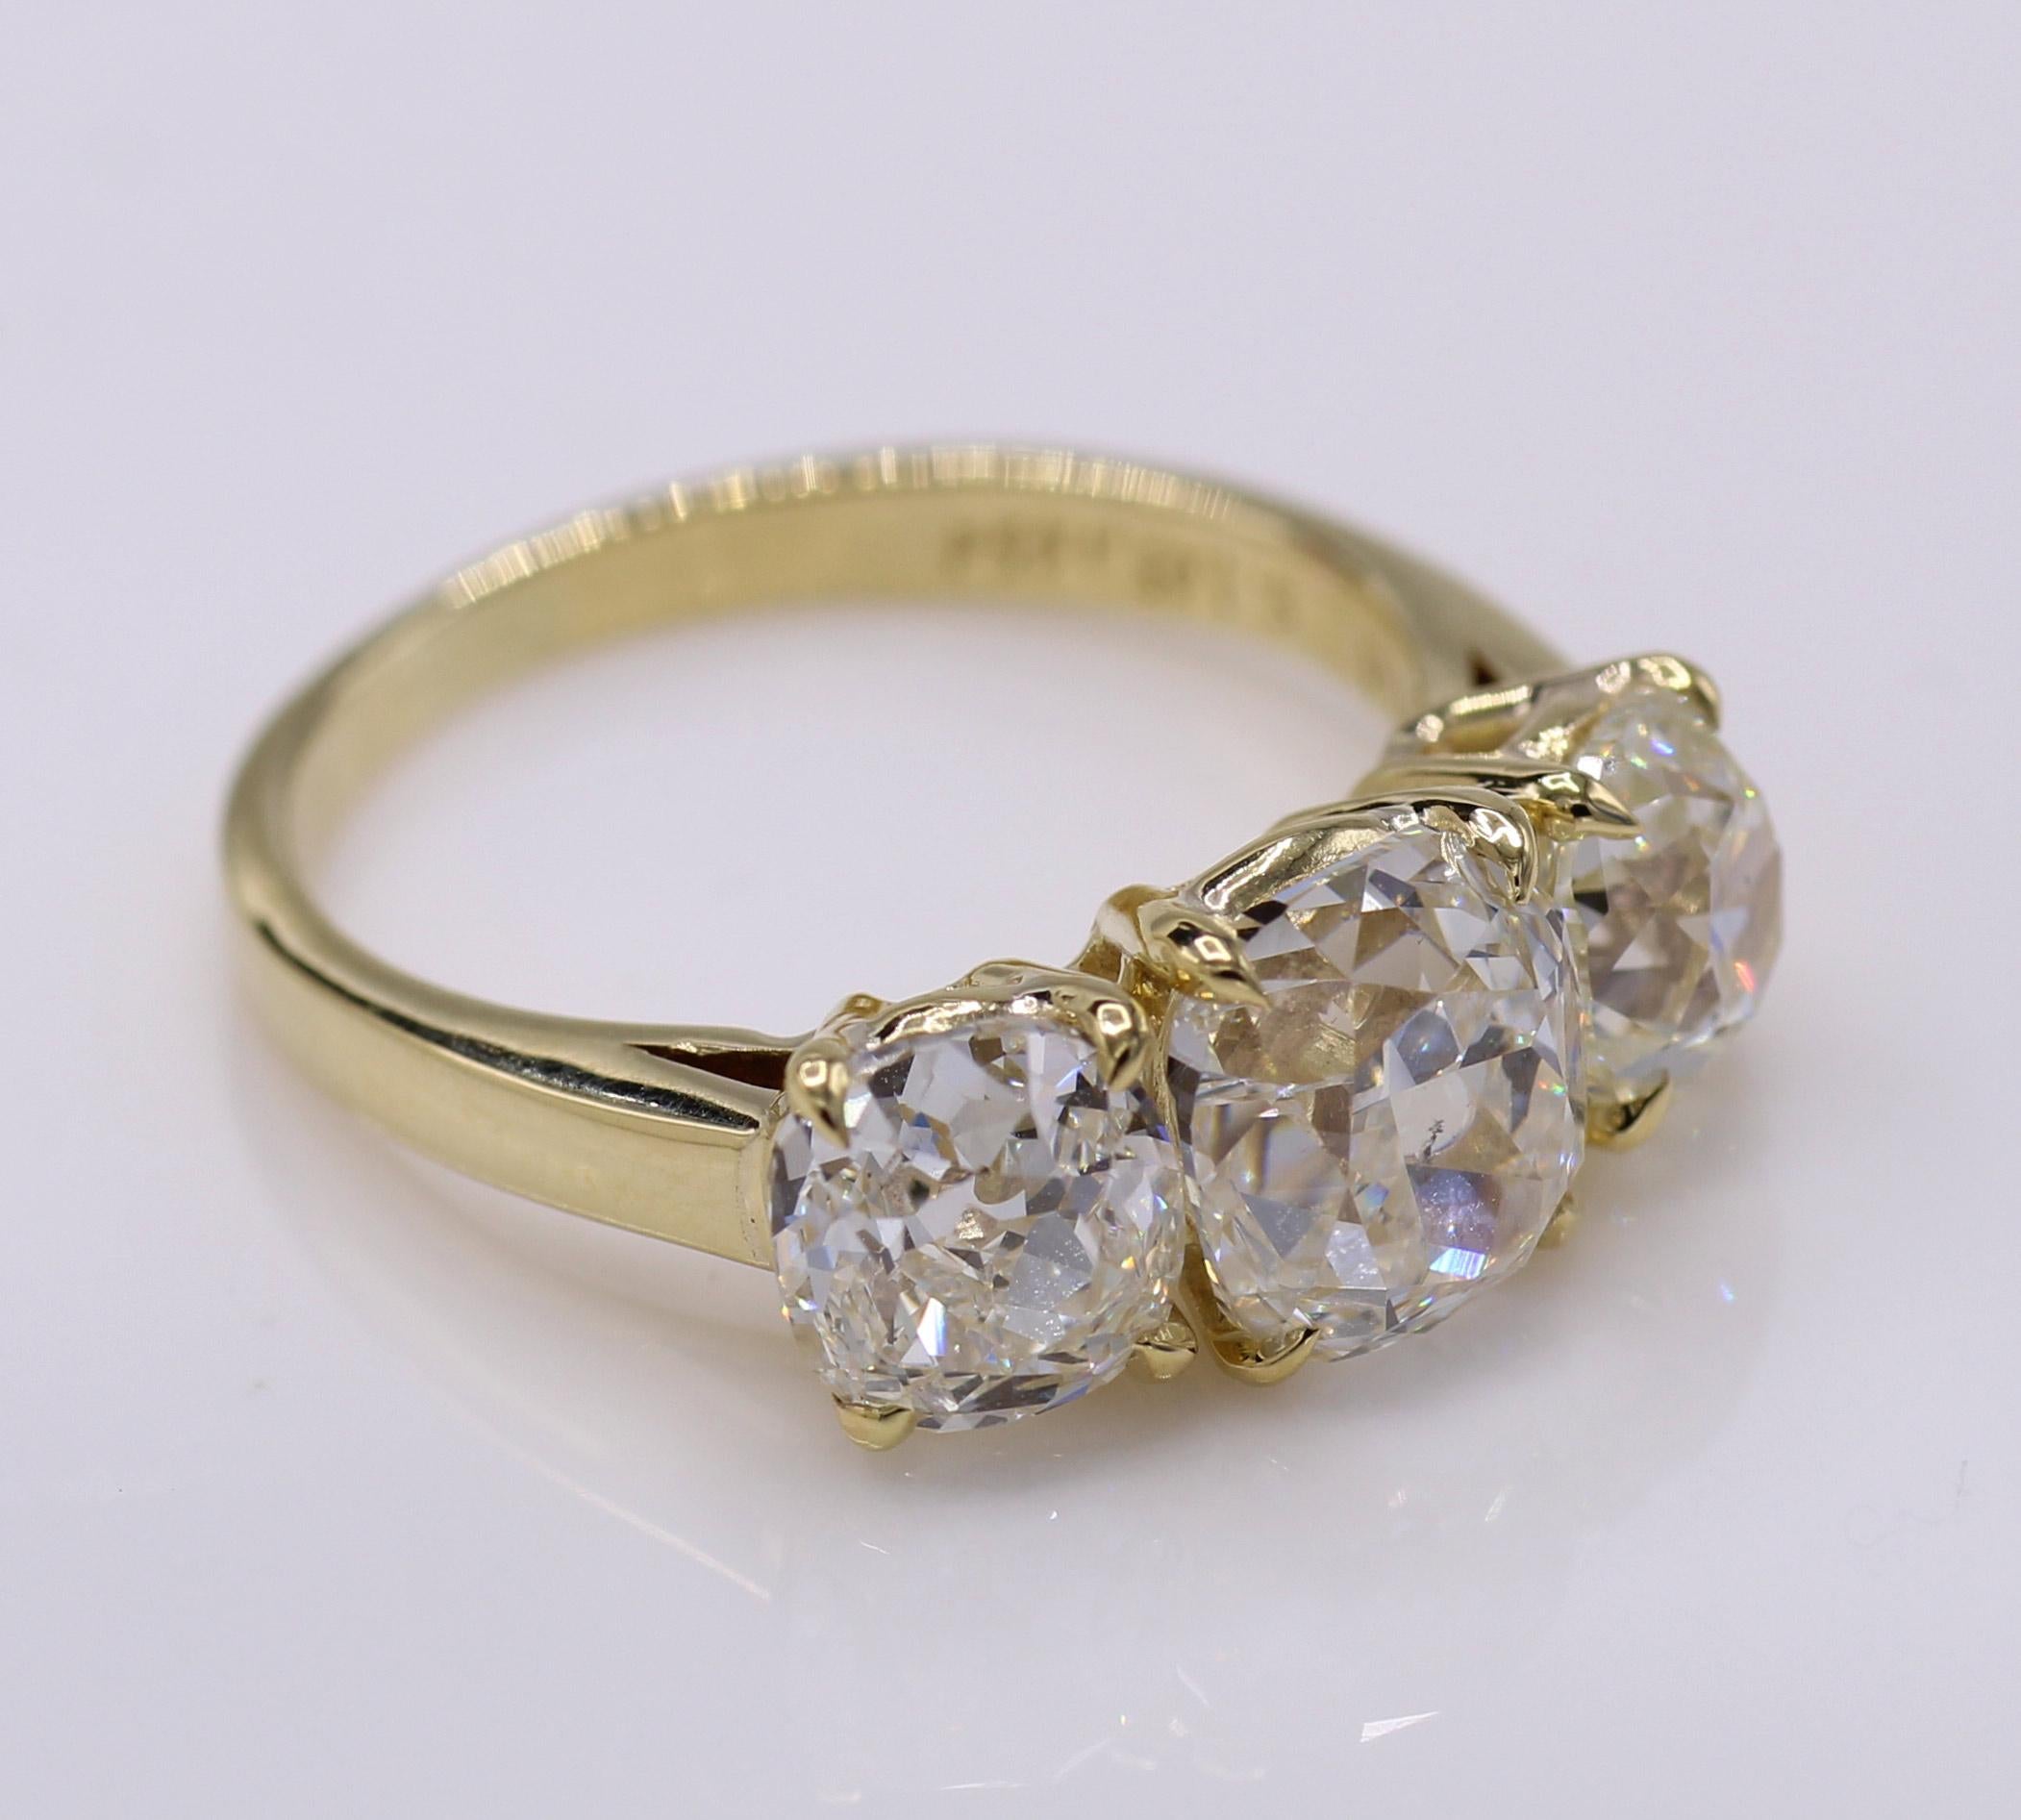 Three beautiful antique cut diamonds have been set in this magnificently hand-crafted 18 karat yellow gold mounting. All 3 diamonds are accompanied by reports from the GIA. The center cushion brilliant weighing 2.03 has a color grade of H with a